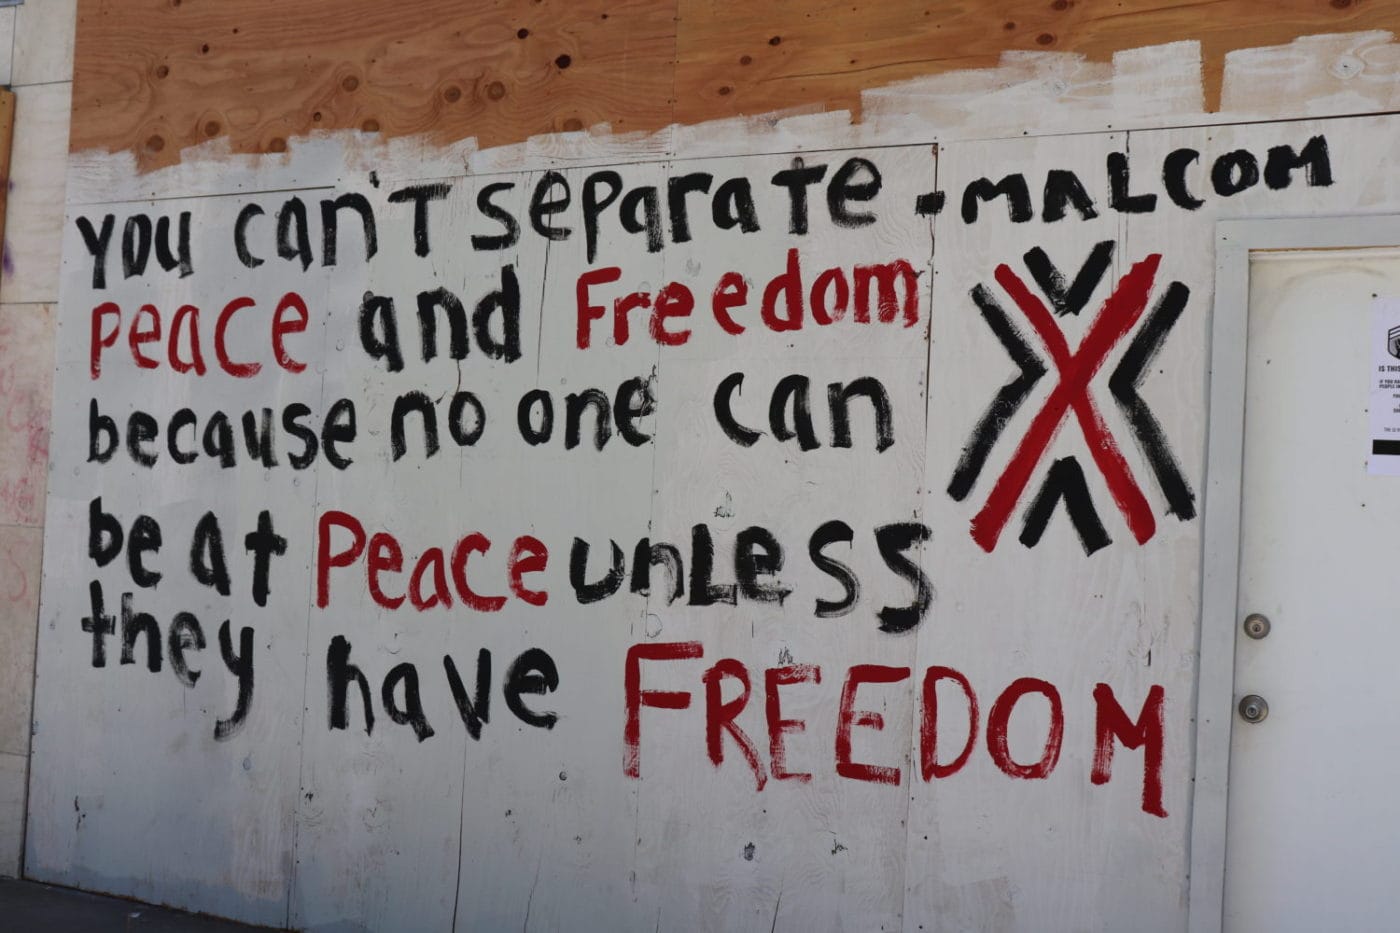 You-can’t-separate-peace-and-freedom-Malcolm’-mural-on-boarded-up-window-Oakland-0720-by-JR-1-1400x933, The July expiration of the COVID-19 eviction ban and unemployment bonus leads to calls for a General Strike, Local News & Views 